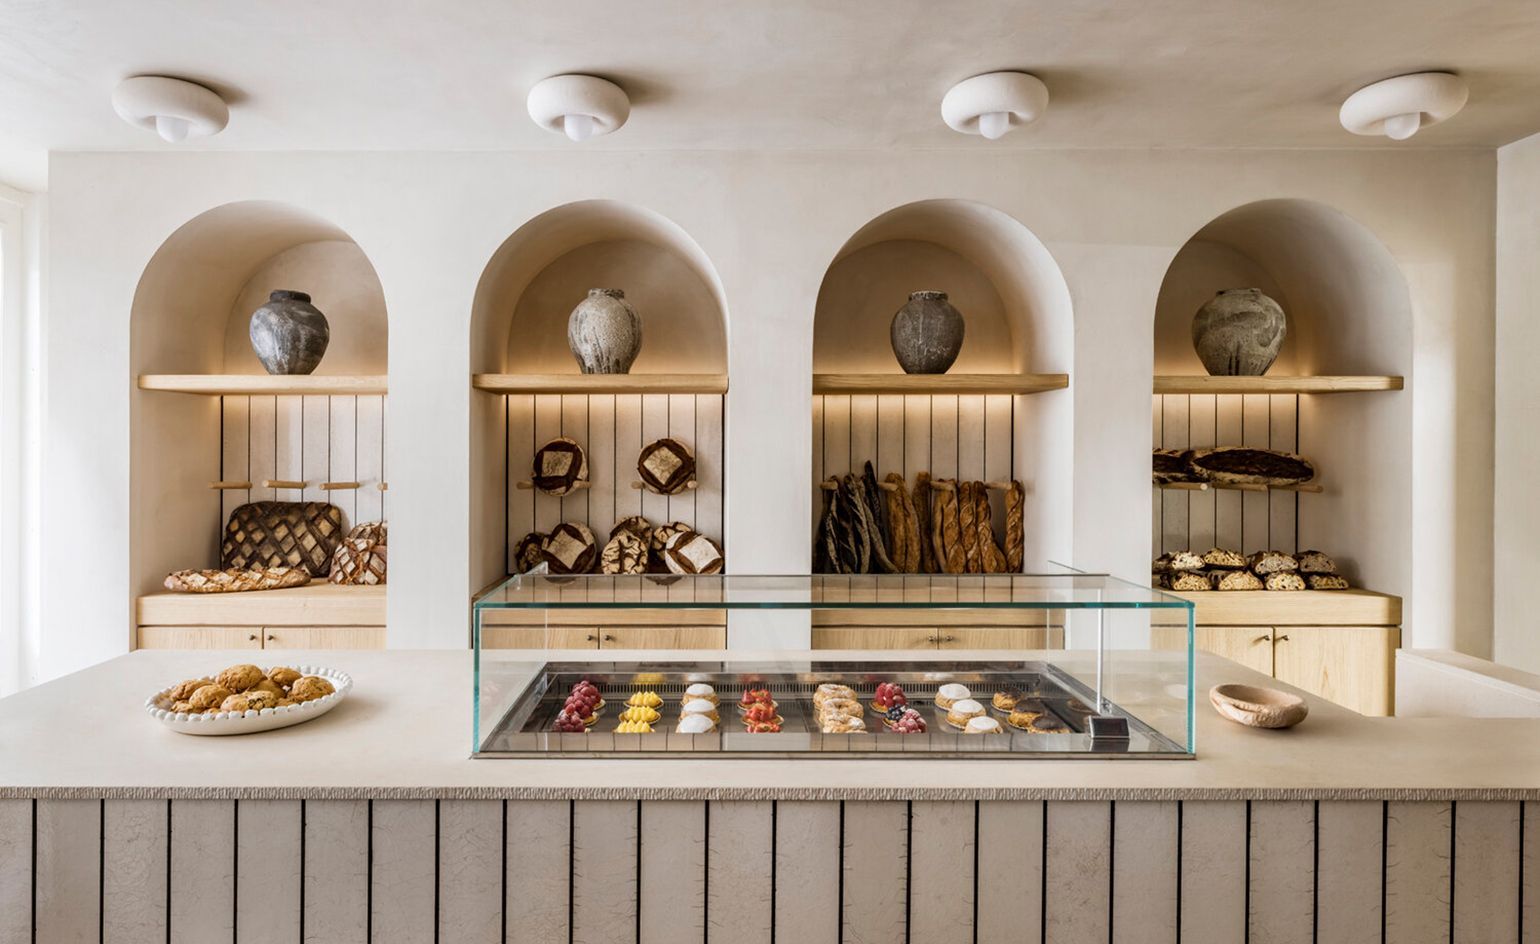 The traditional Parisian bakery gets a minimalist reboot